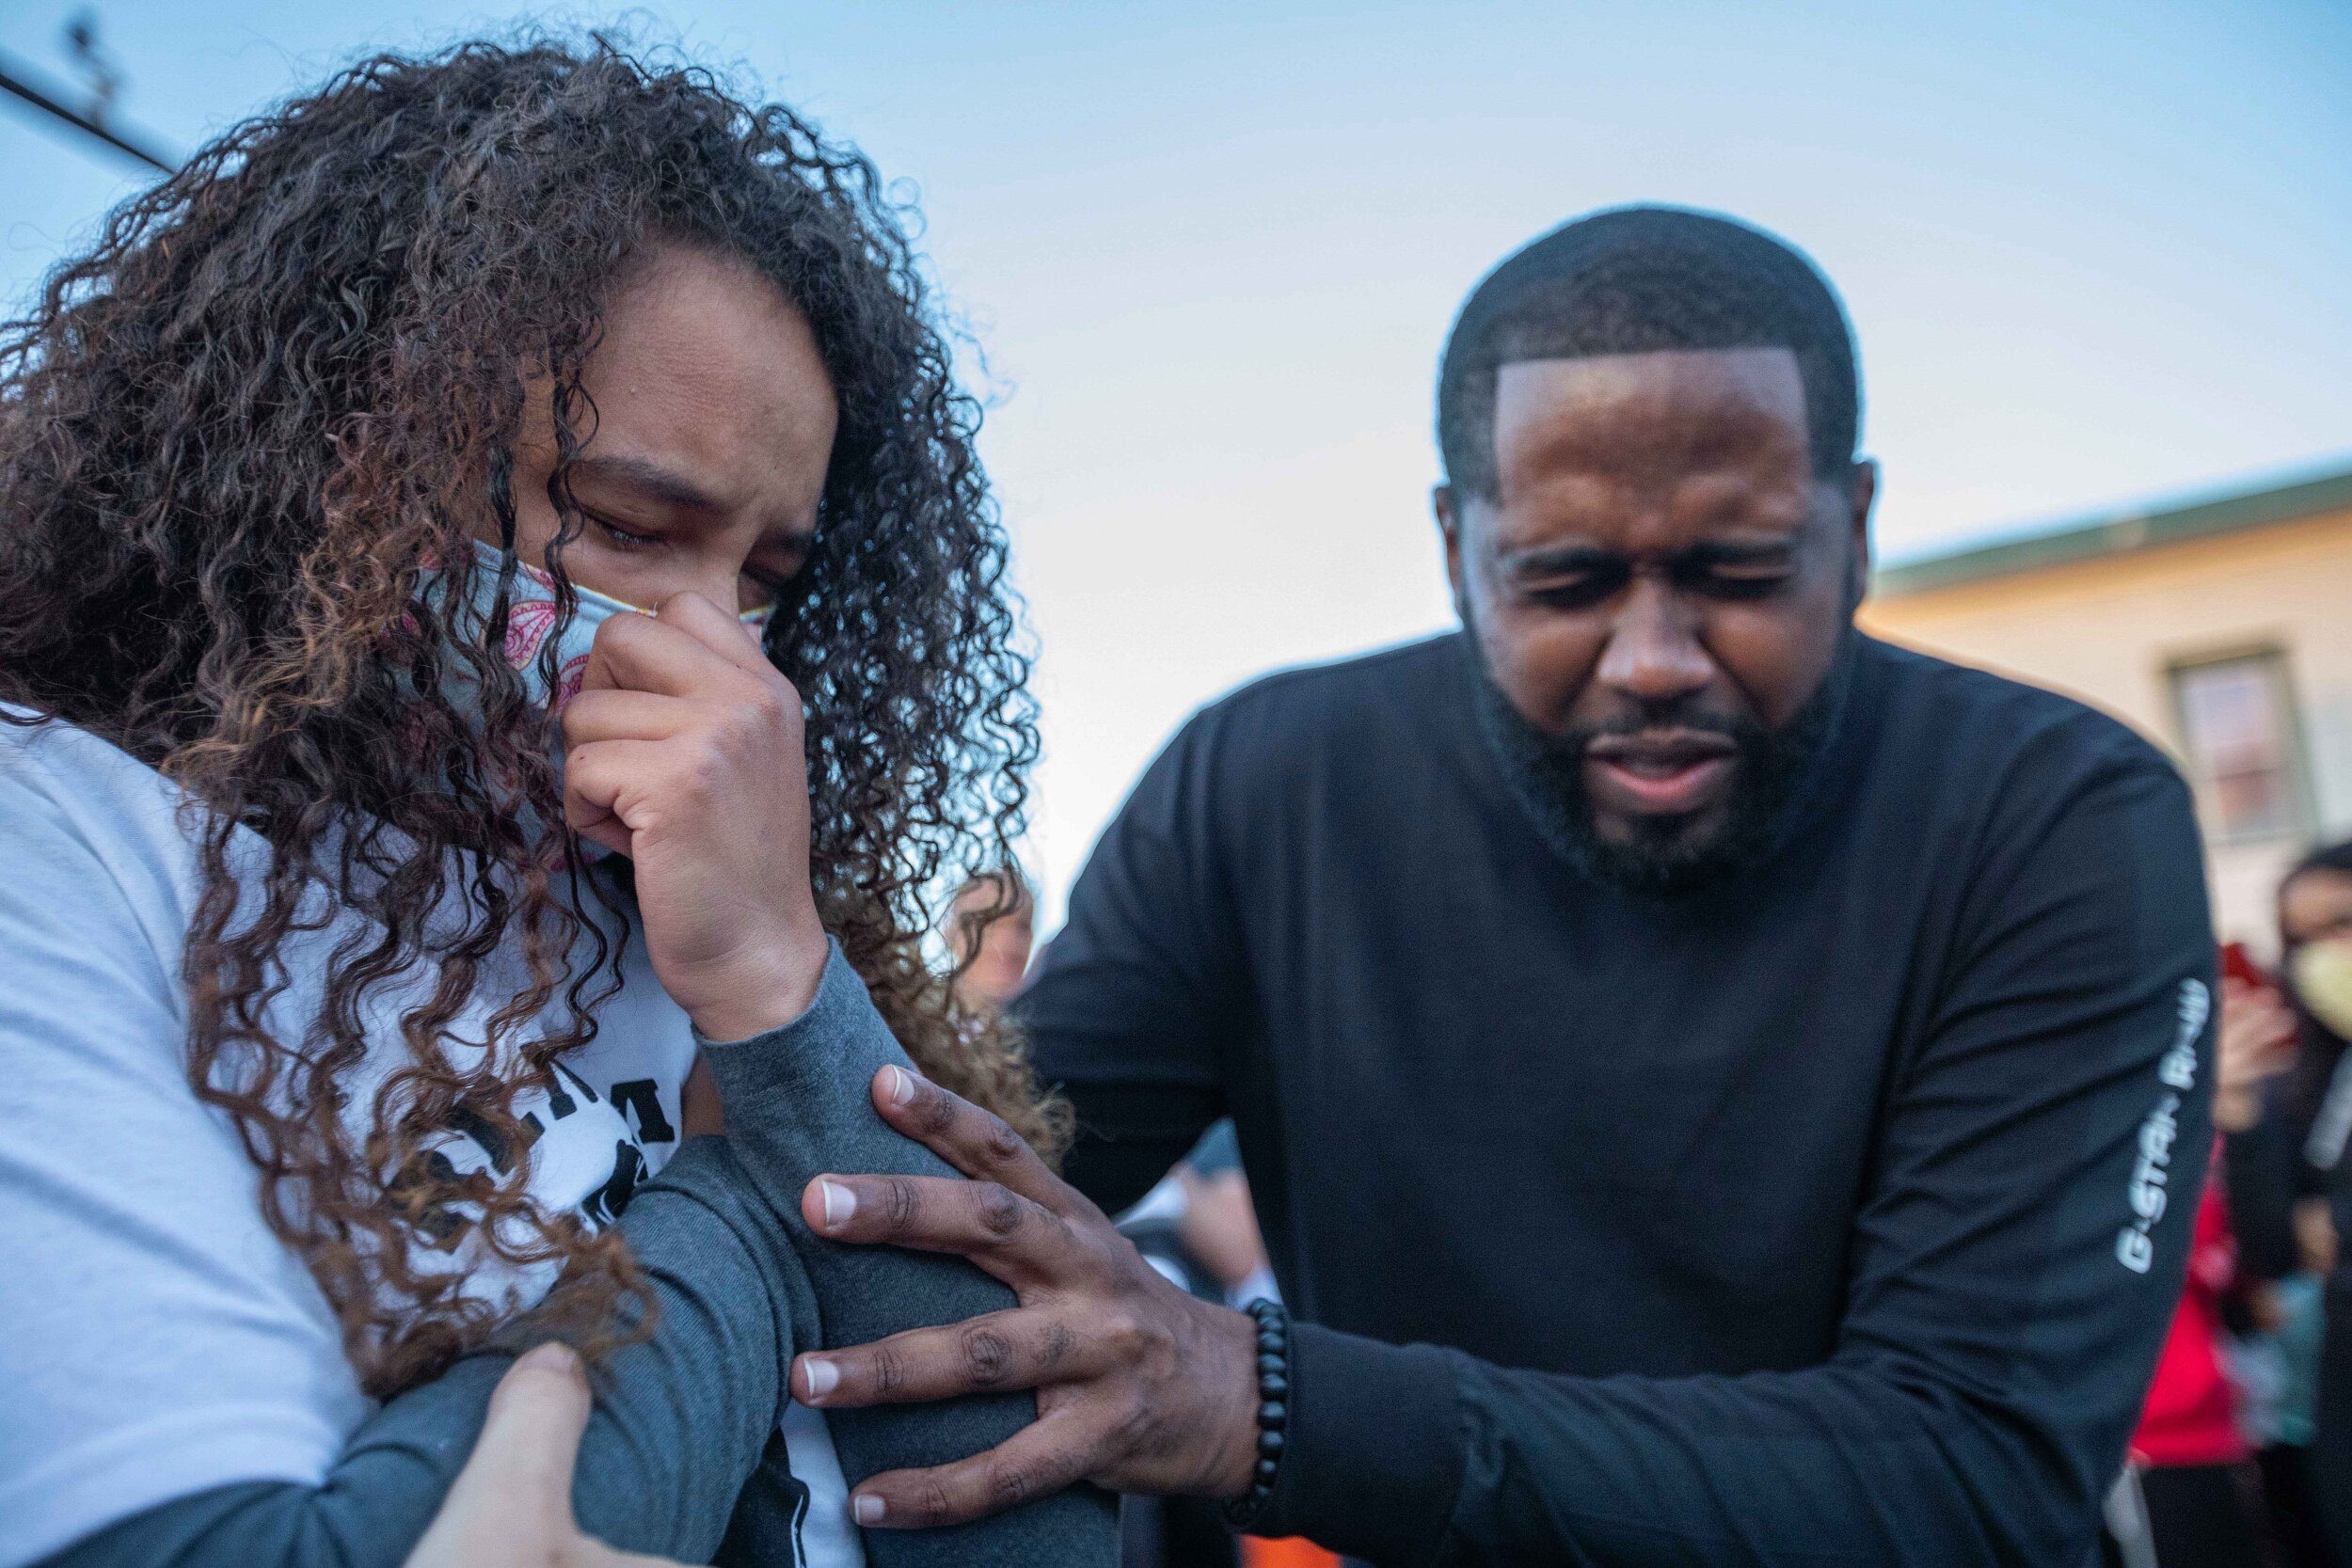  Sade Strong (left) prepares to be baptised on the street of George Floyd Square as Pastor Joshua Giles prays over her before baptizing her in Minneapolis, Minnesota on Jun 13, 2020. 